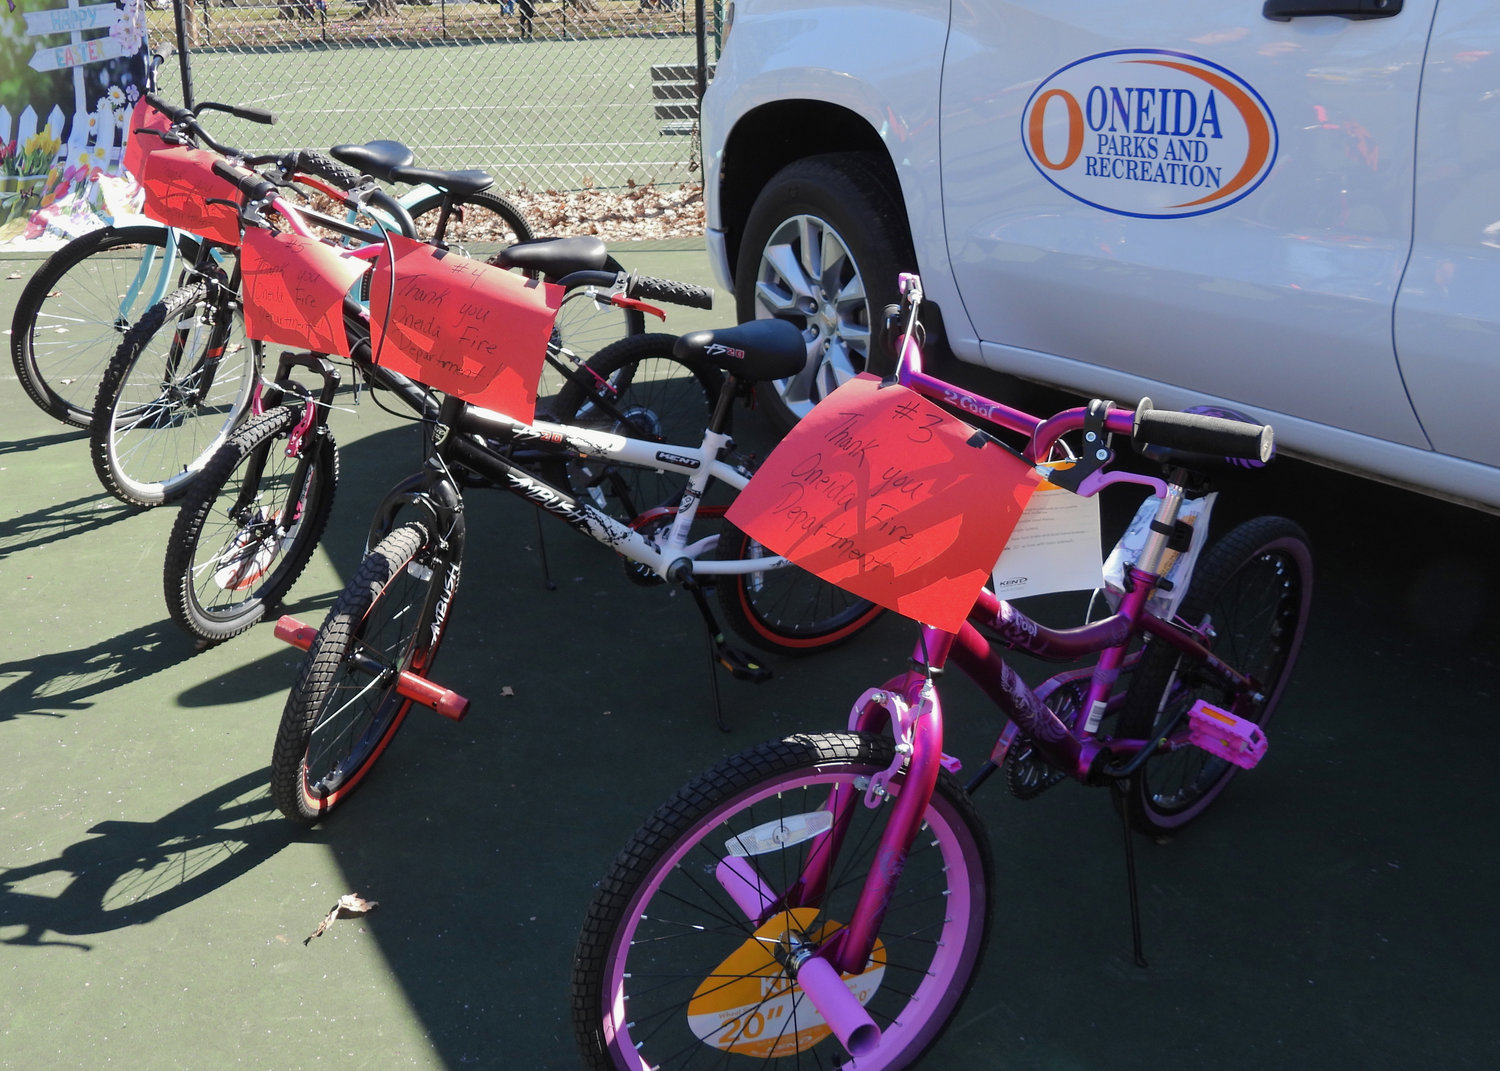 The annual Oneida Easter Egg Hunt saw kids of all ages in Allen Park filling their bags and baskets with eggs on Saturday, April 8 in Oneida. Pictured are some of the bikes children could take home if they found one of seven special eggs.